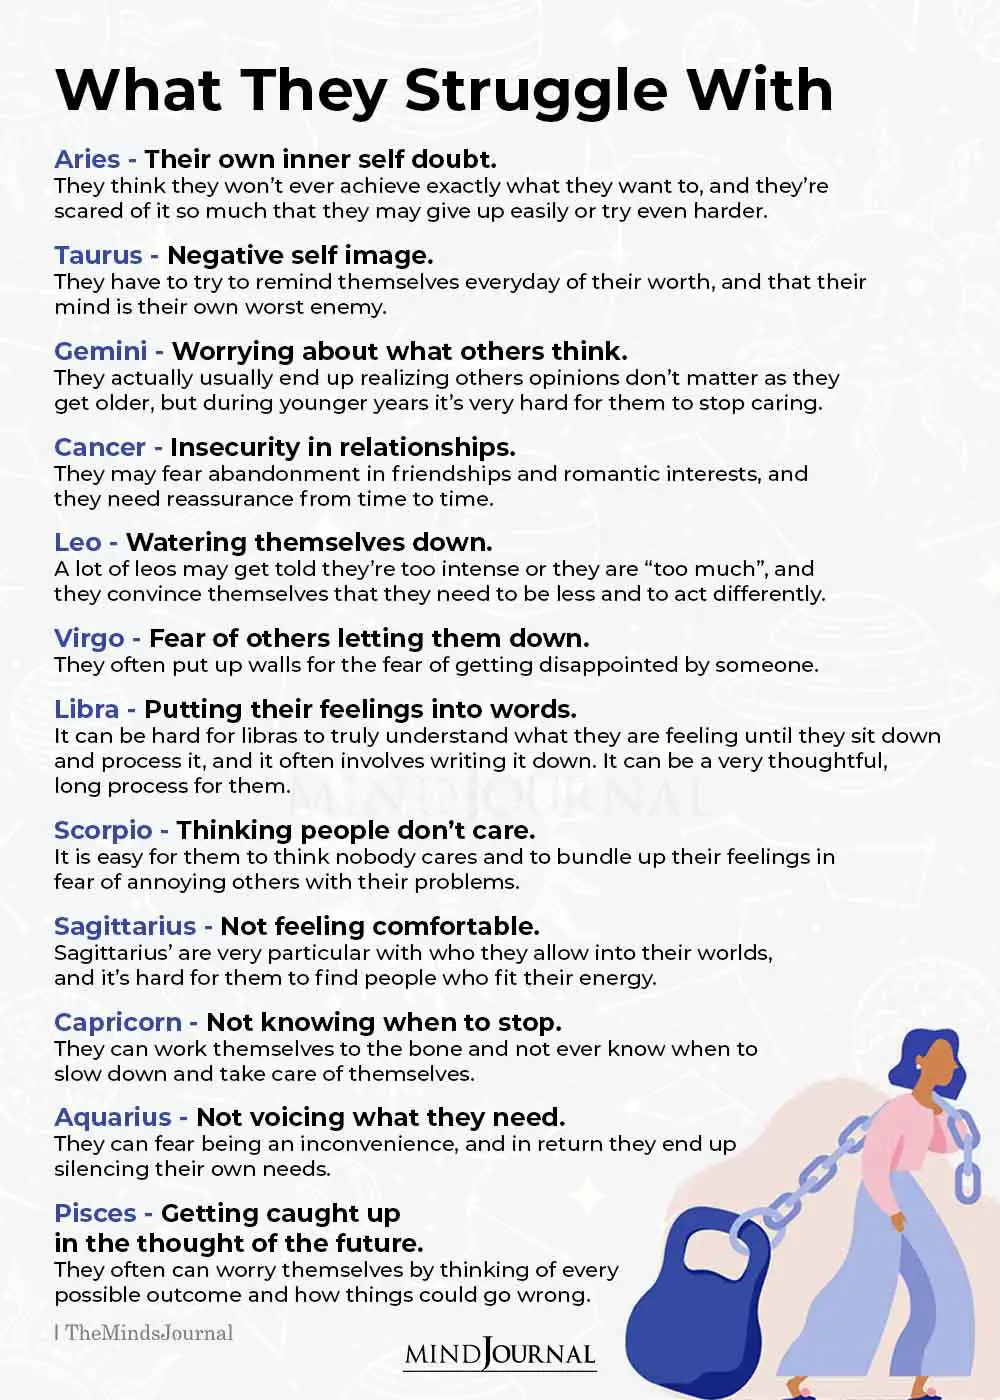 each zodiac sign struggles with